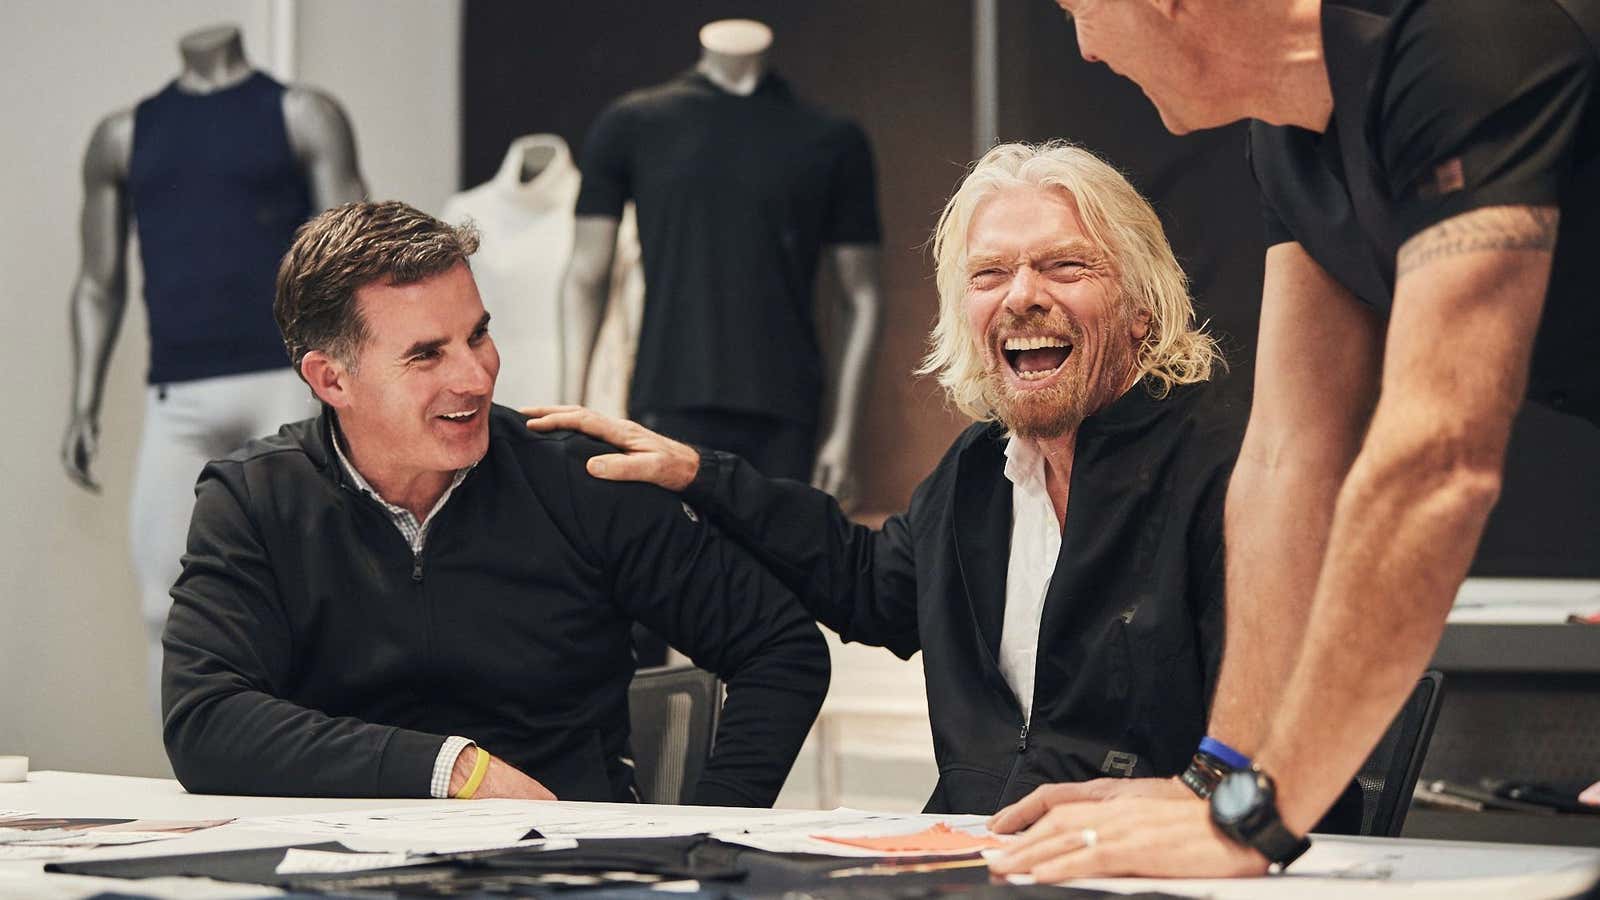 Kevin Plank and Richard Branson, having a good laugh about getting off this planet.